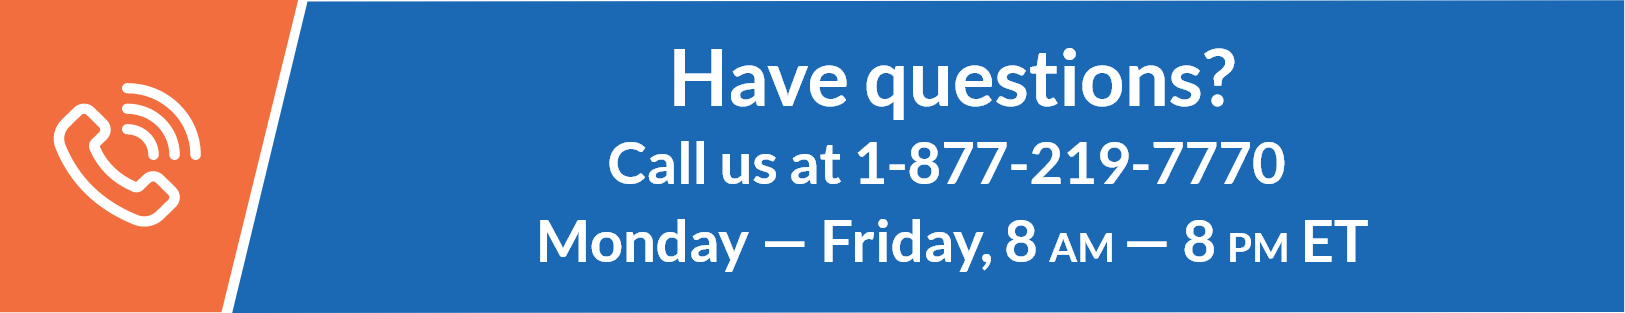 Have Questions? Call us at 1-877-219-7770 Monday — Friday, 8 AM — 8 PM ET